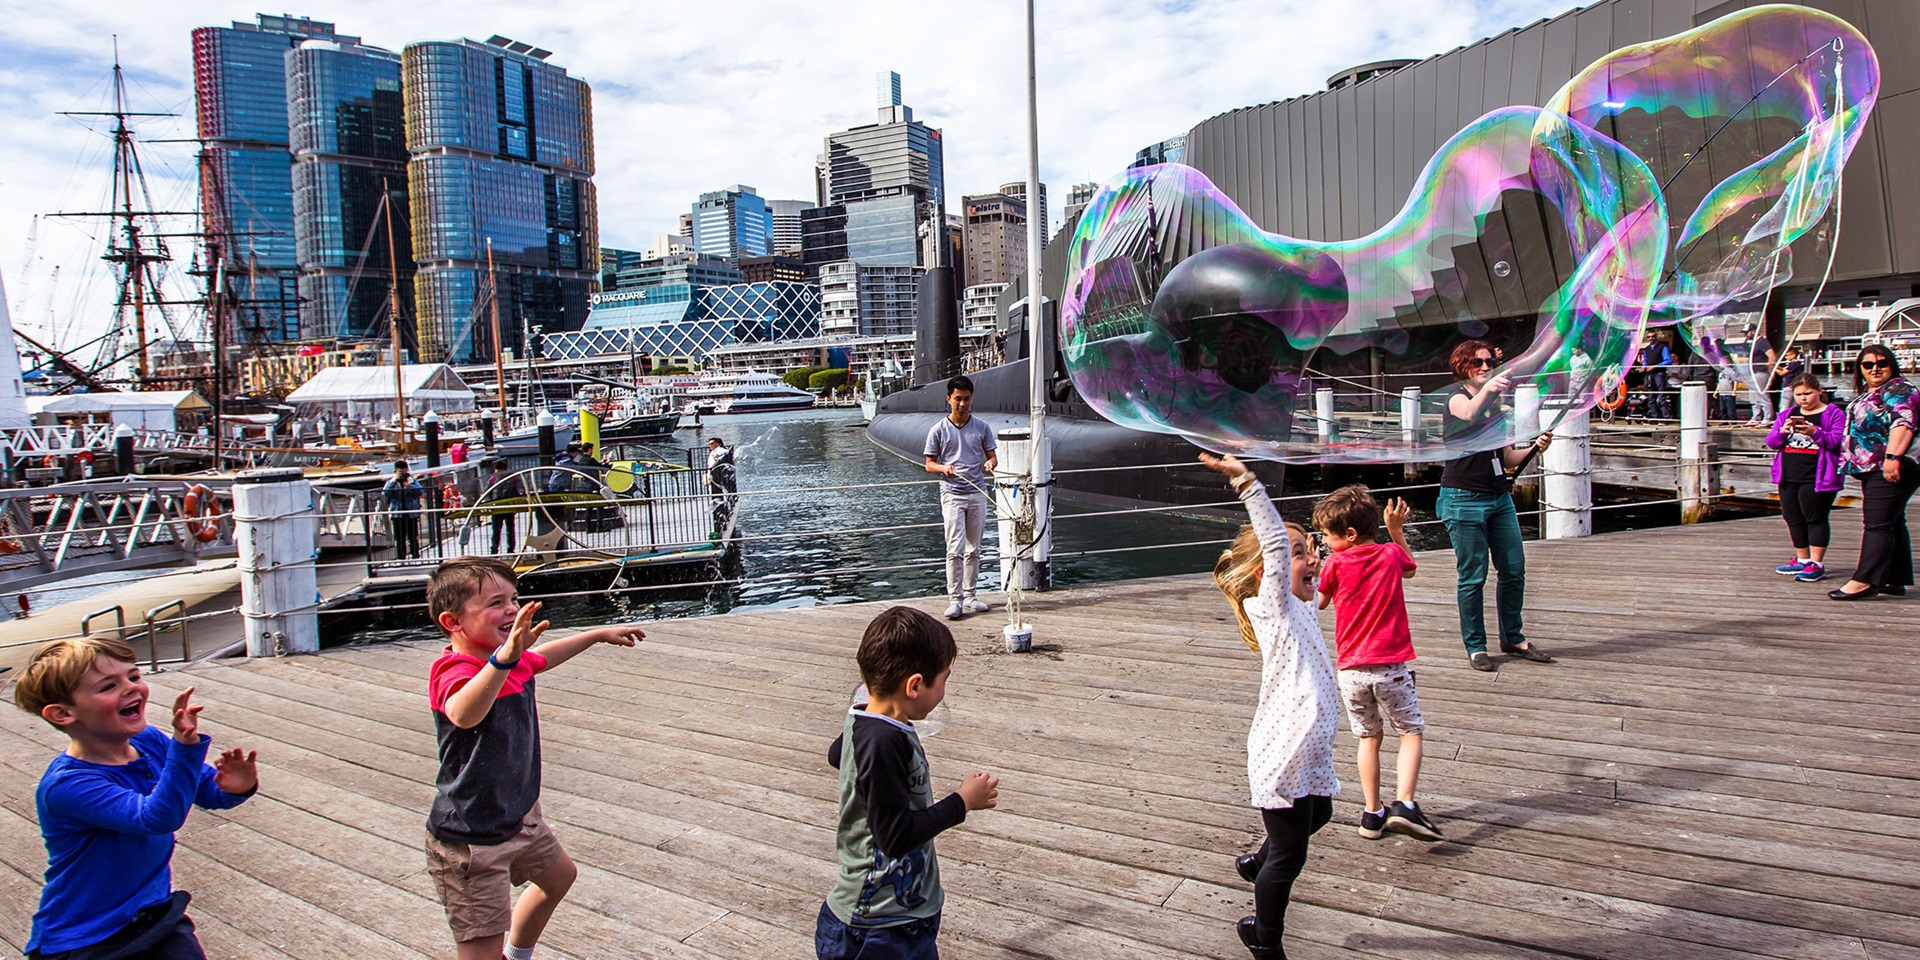 A group of children playing with giant bubbles on the museum's performance platform